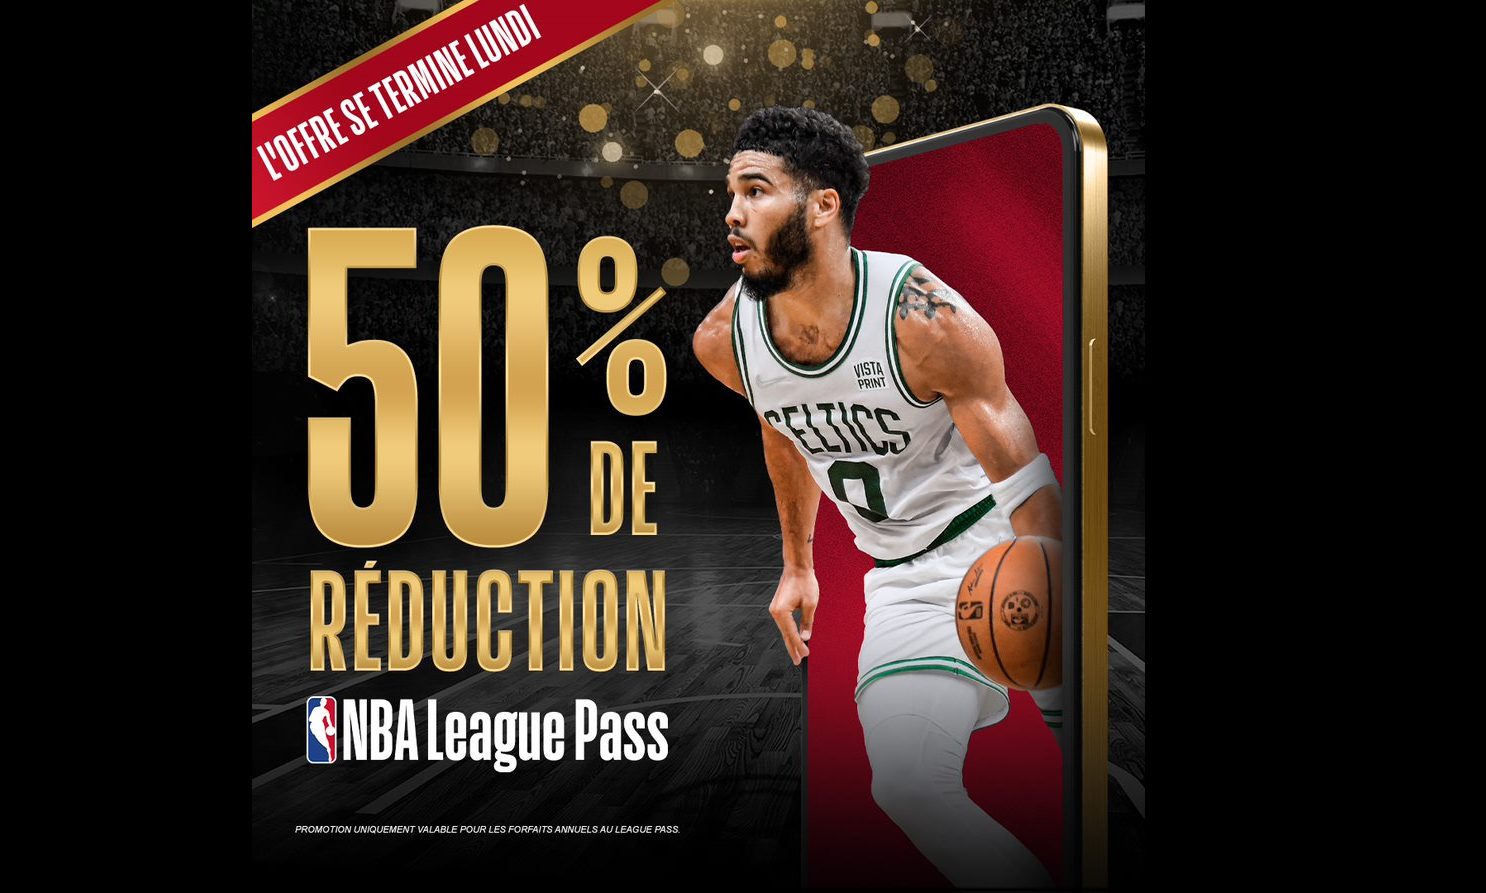 THE NBA TO OFFER A 50% BLACK FRIDAY DISCOUNT FOR ANNUAL LEAGUE